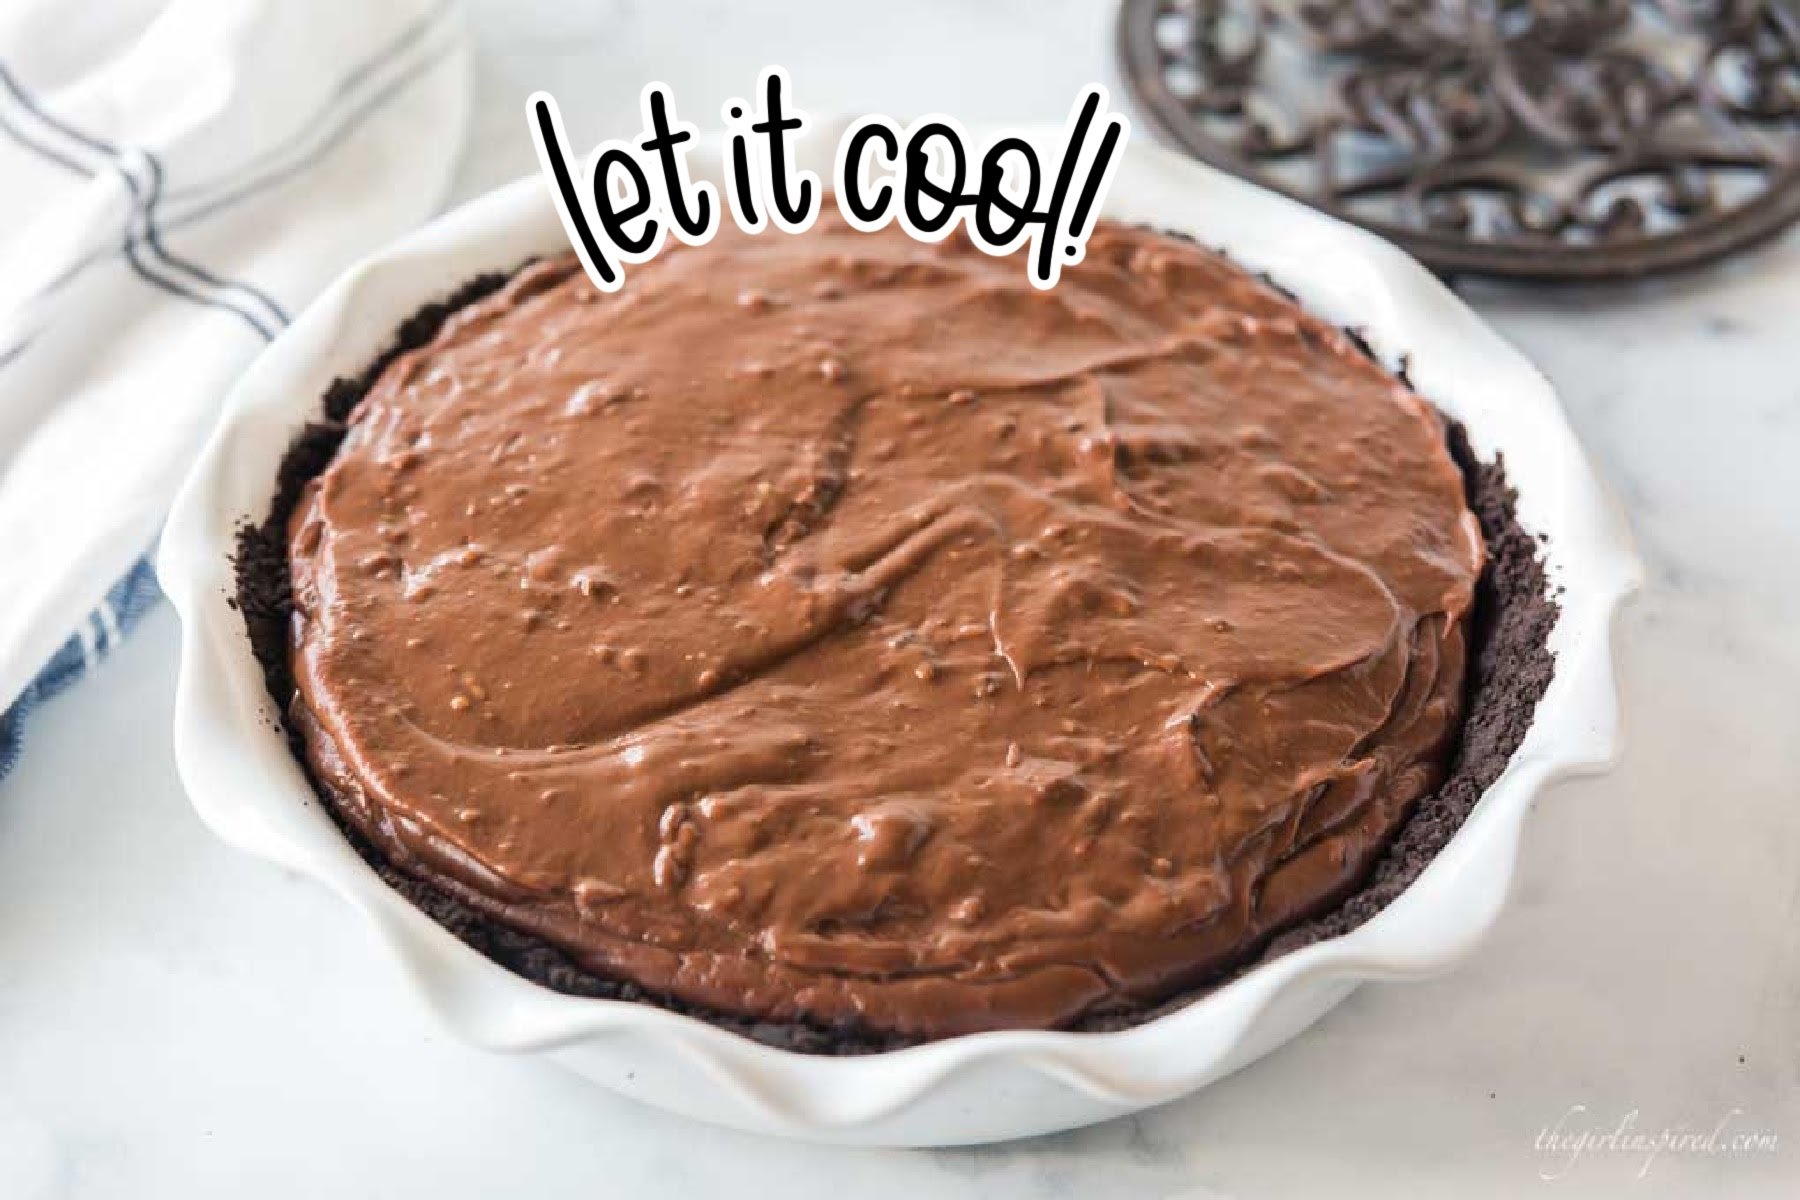 Filled chocolate cream pie in pie dish with text "let it cool."